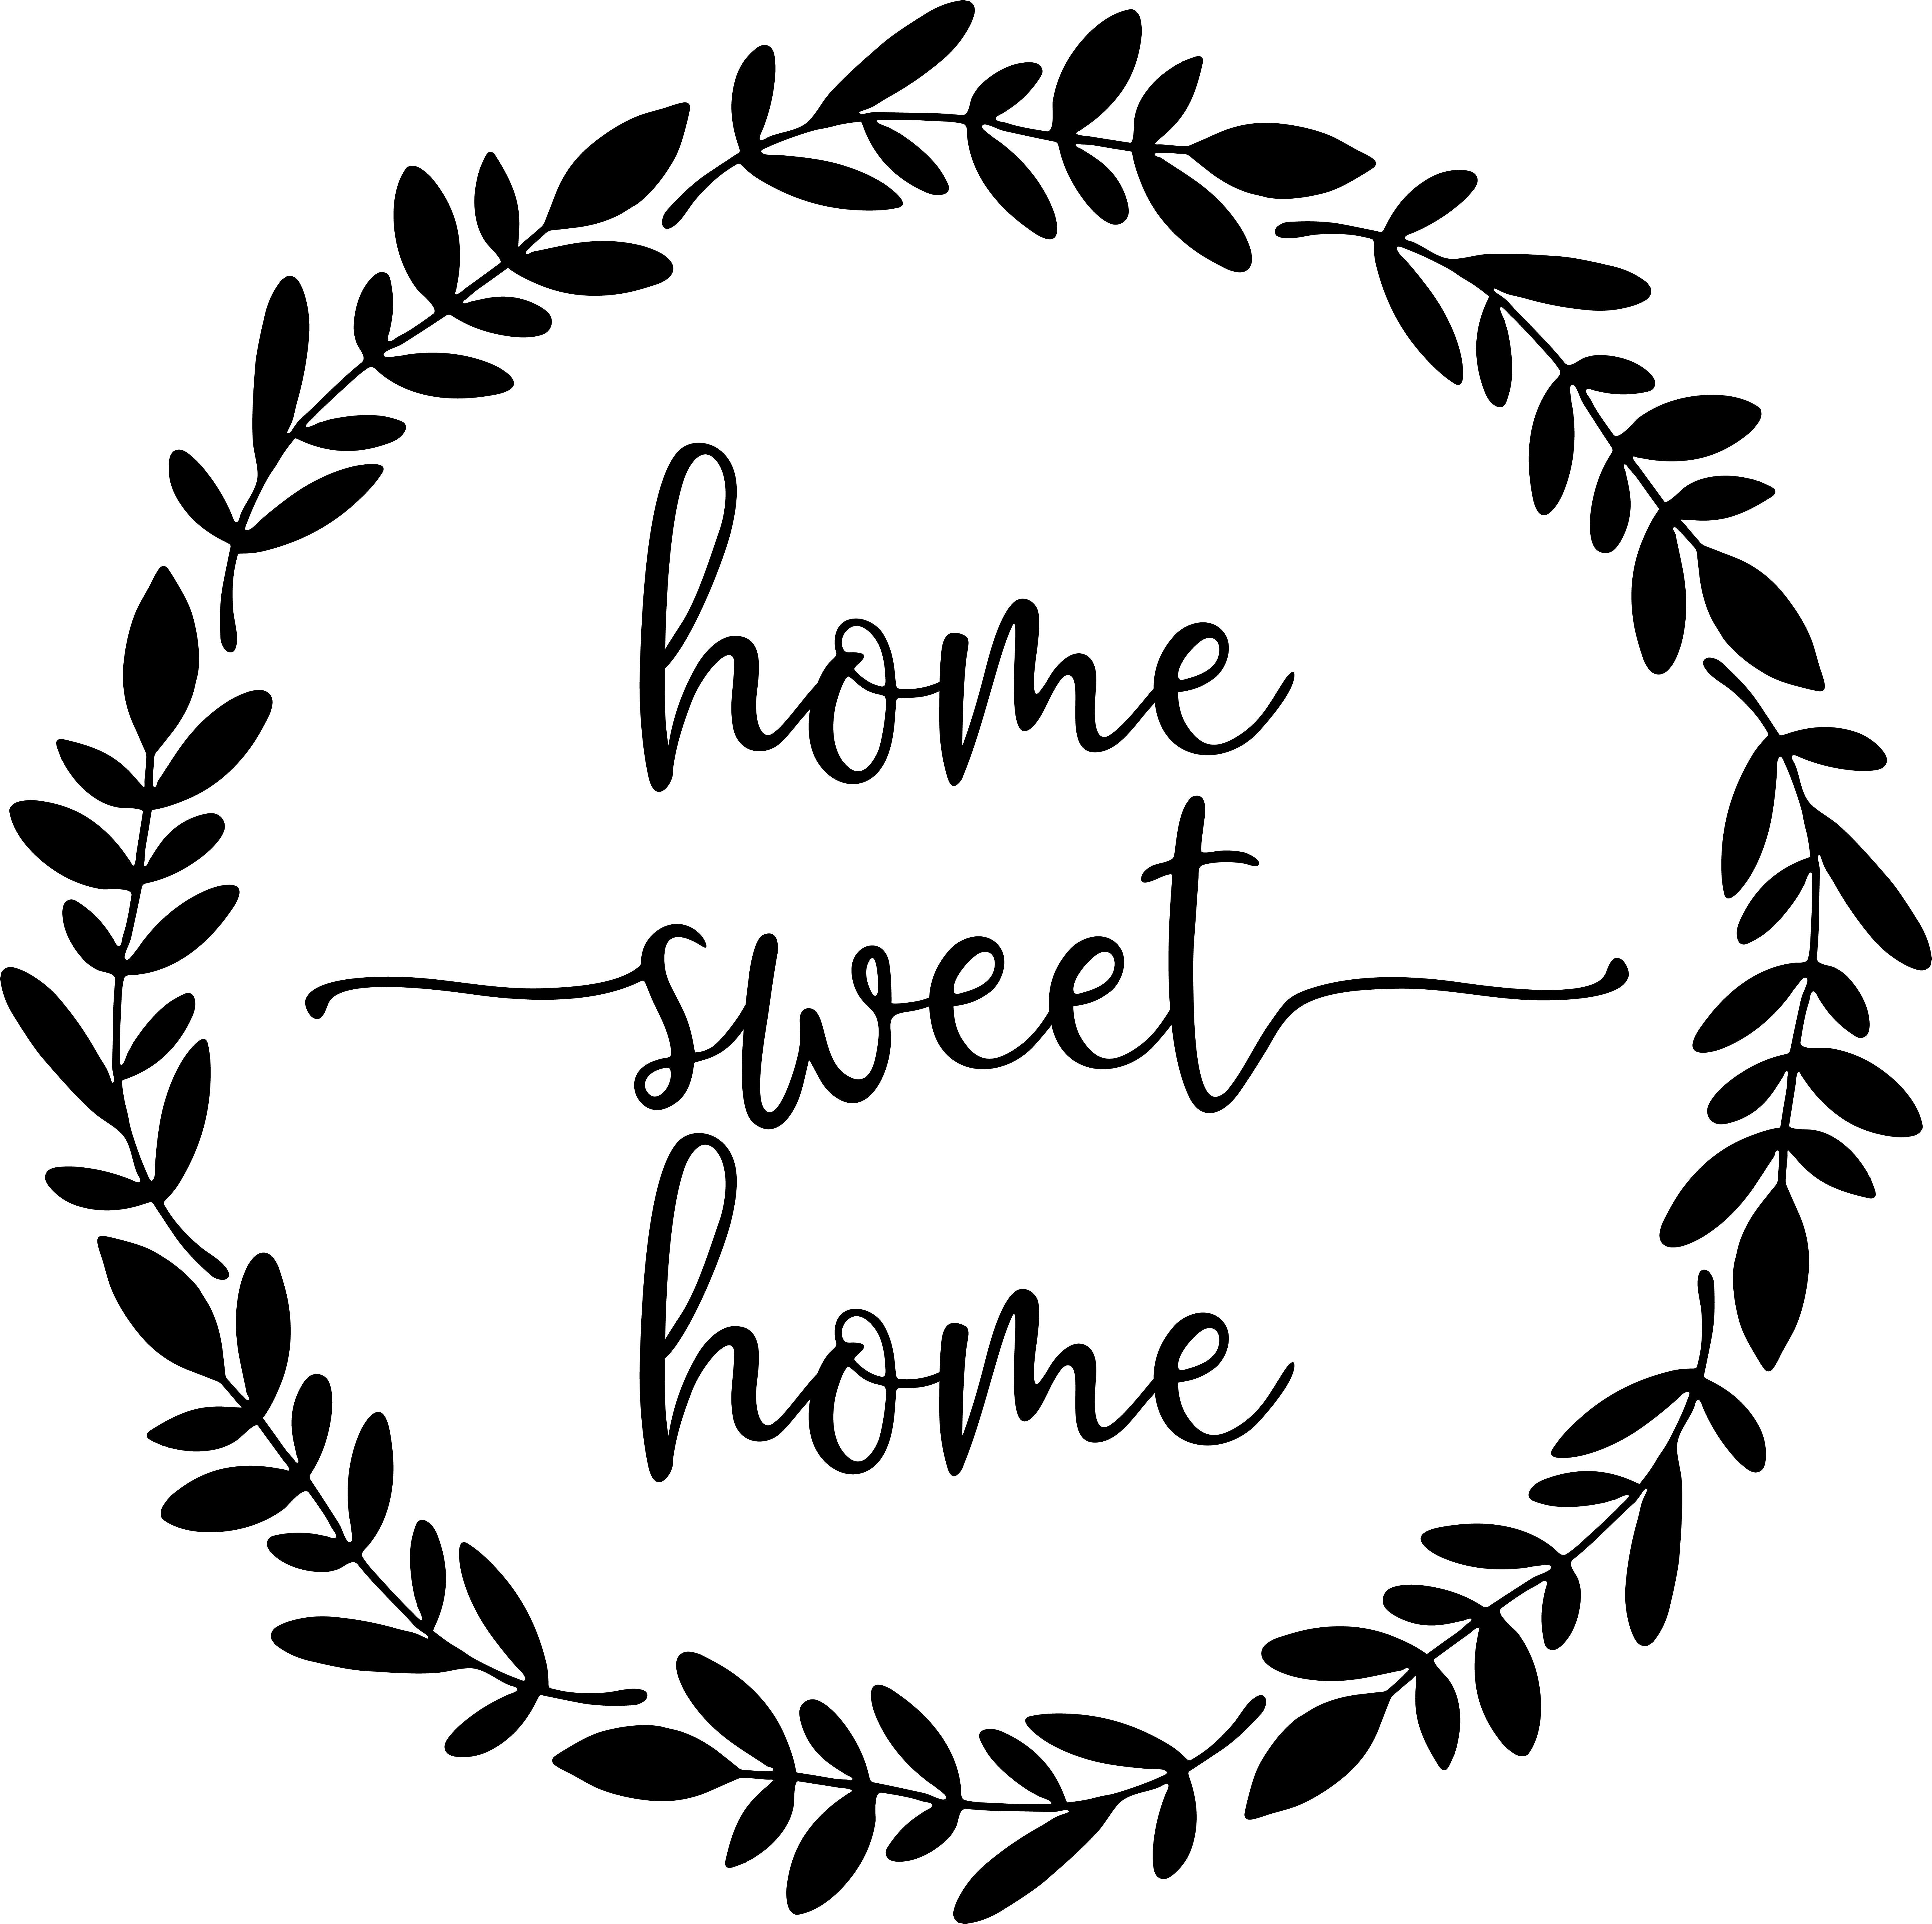 Download AH010 - Home Sweet Home | The Painted Bench Hamilton